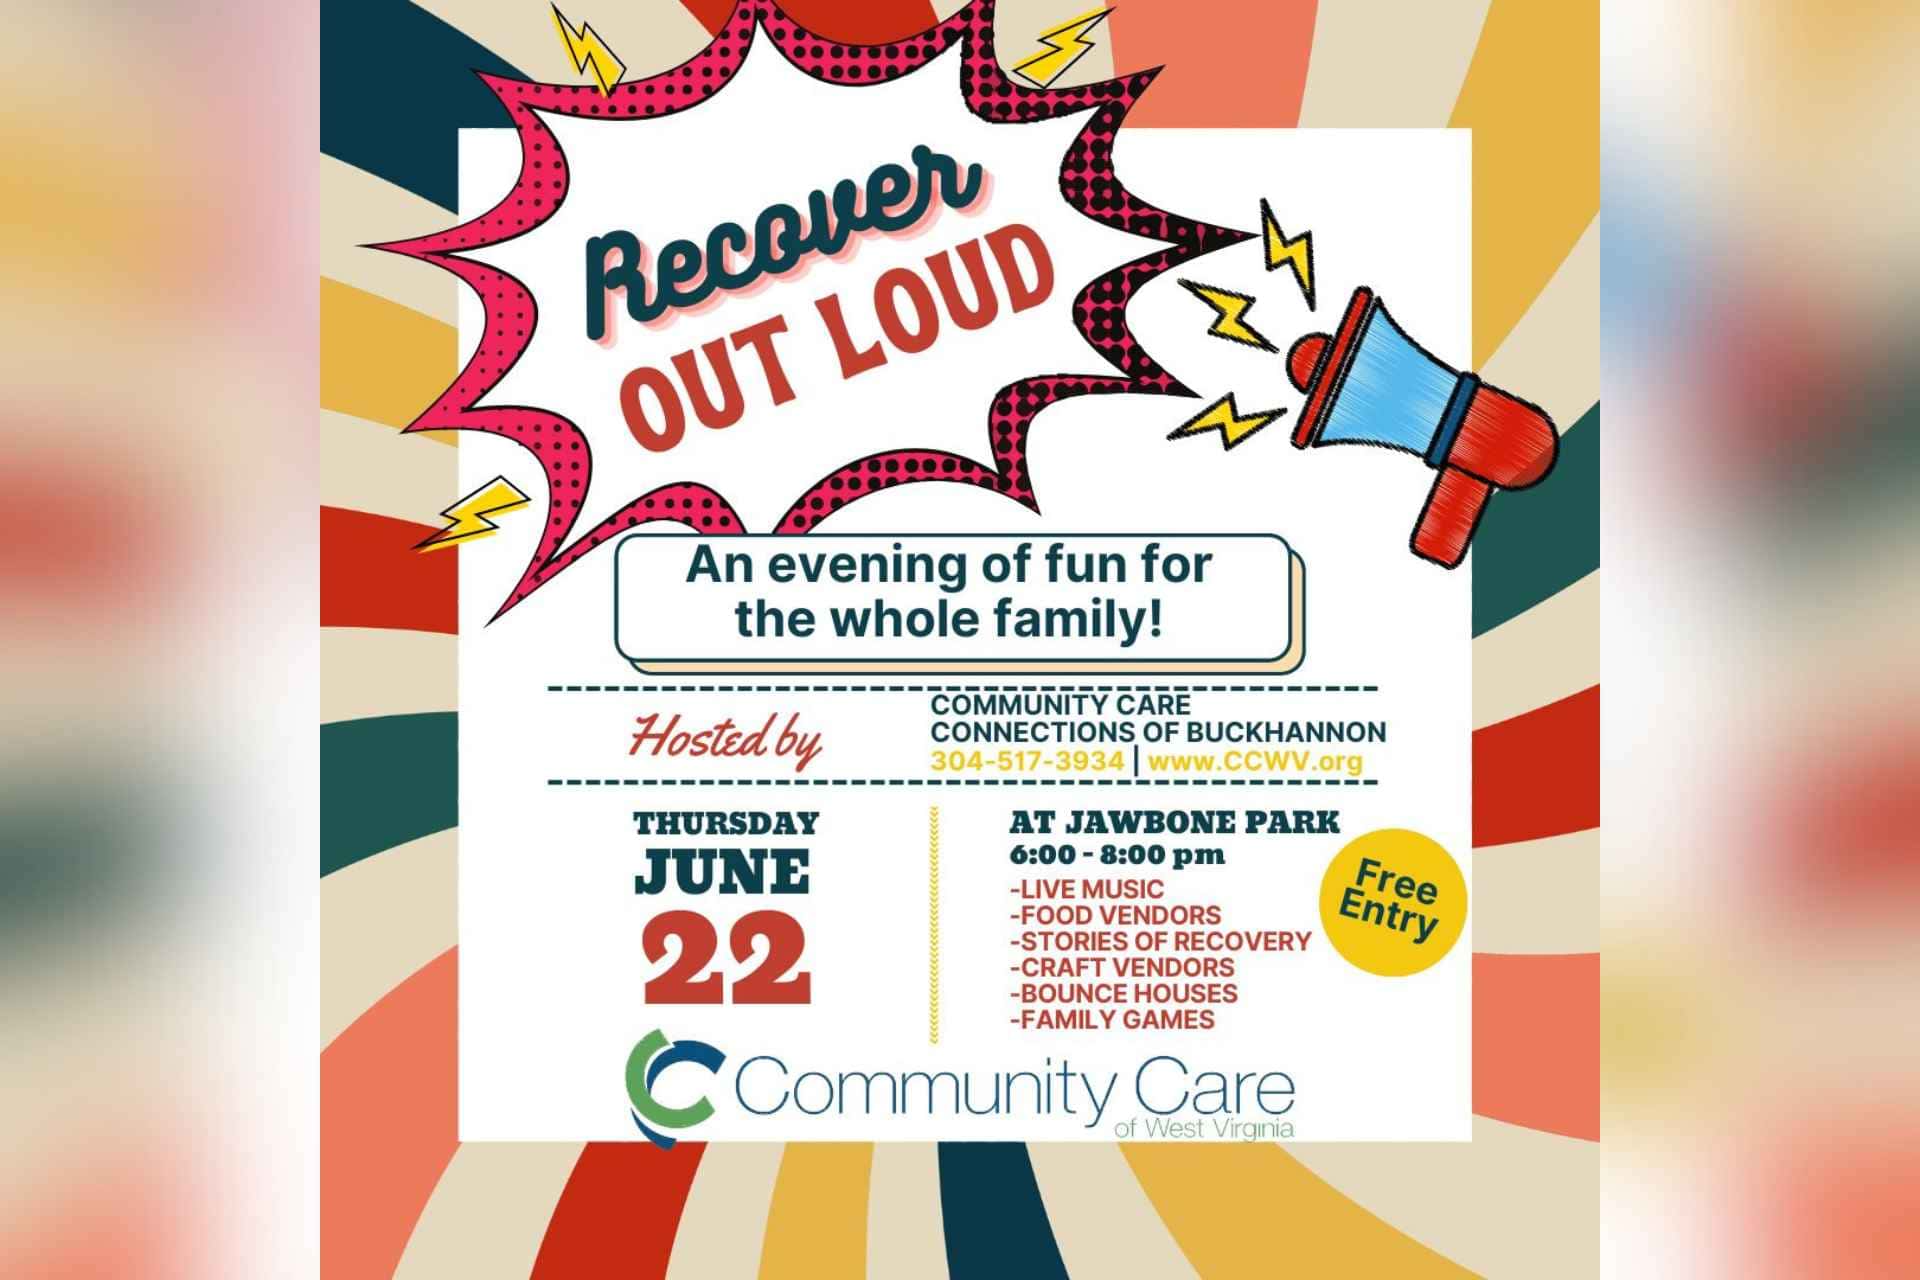 Fun for the whole family this June at local park